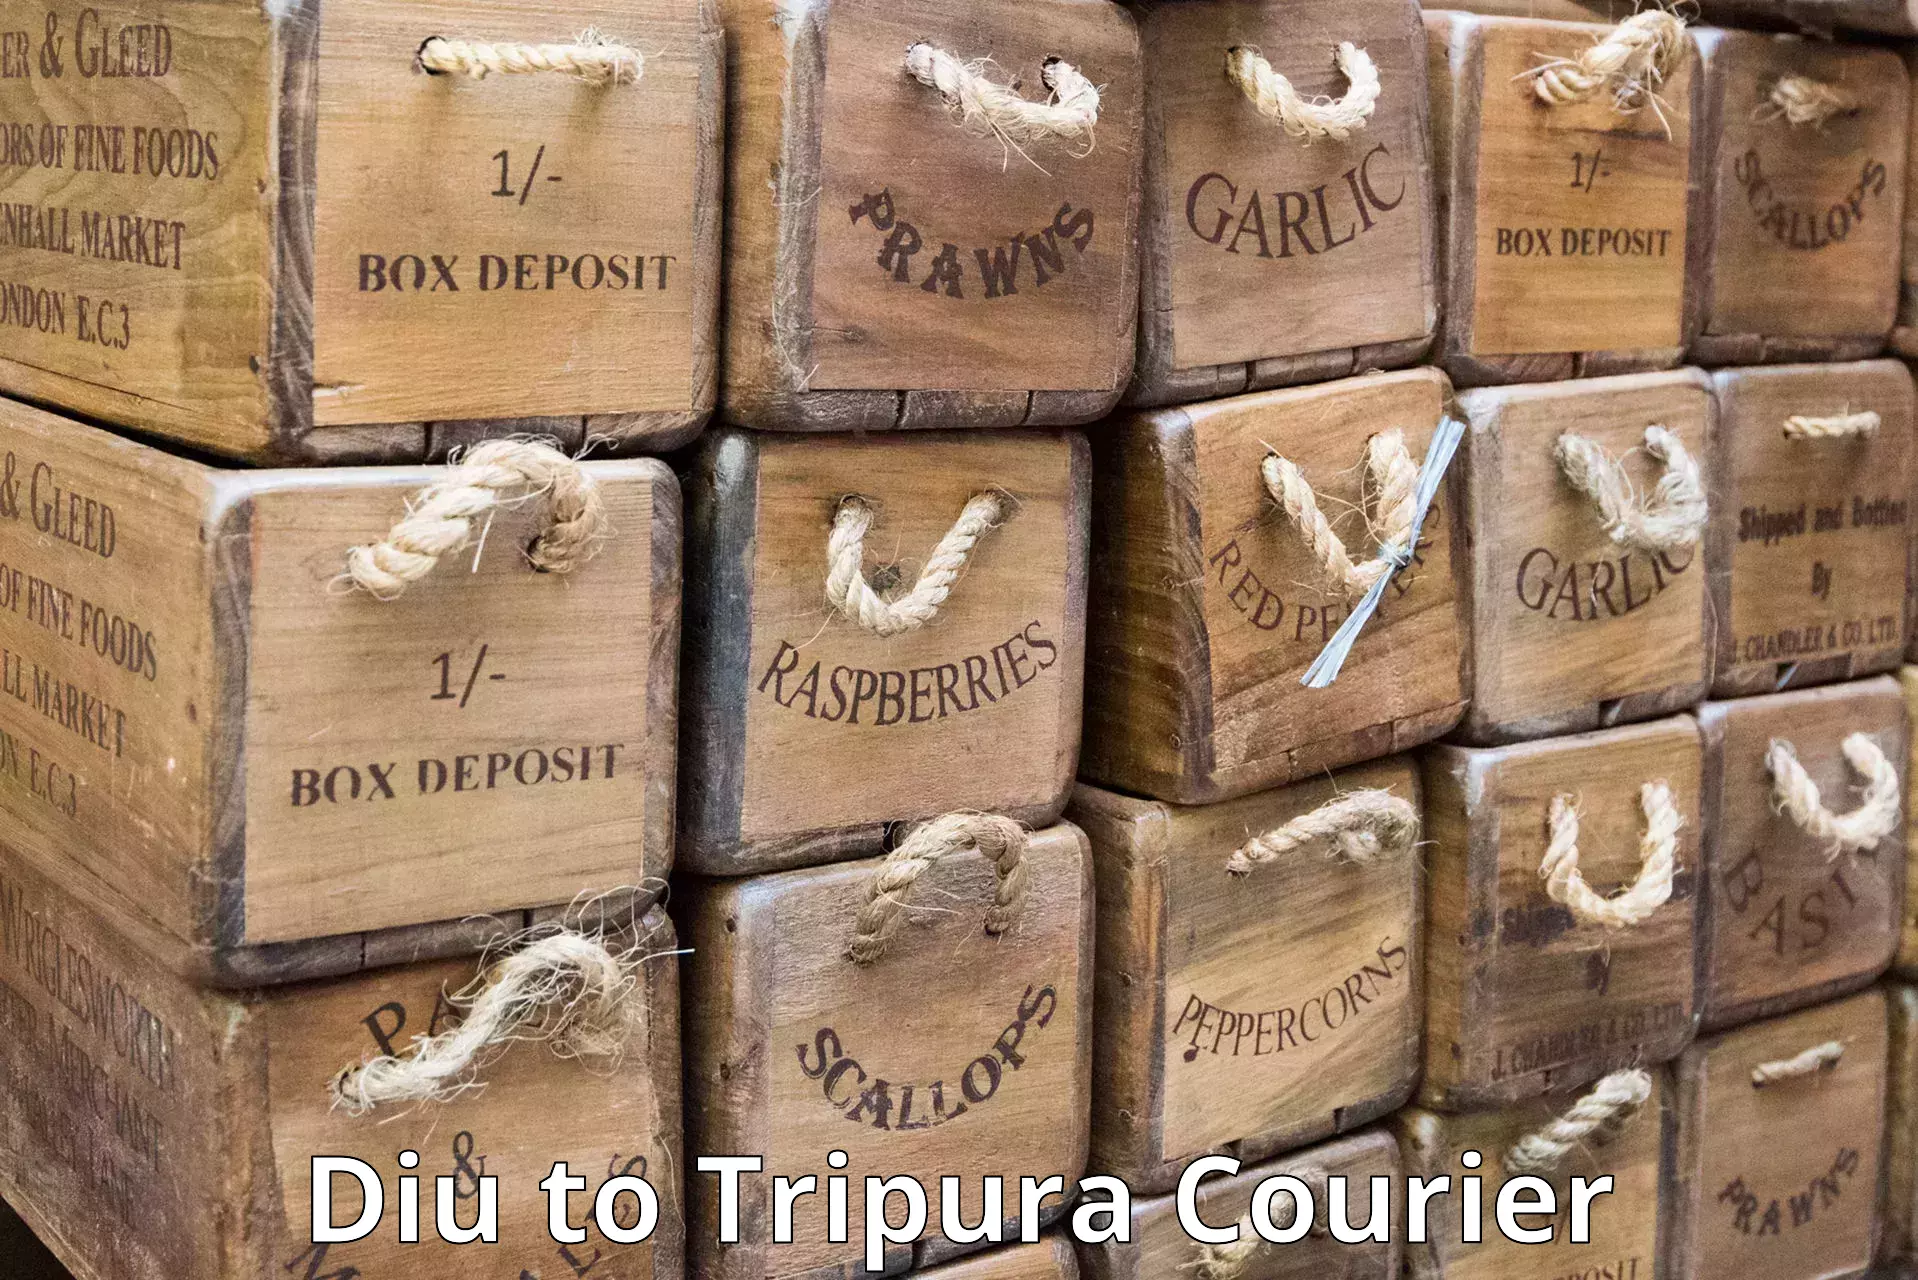 Tailored shipping plans Diu to Udaipur Tripura